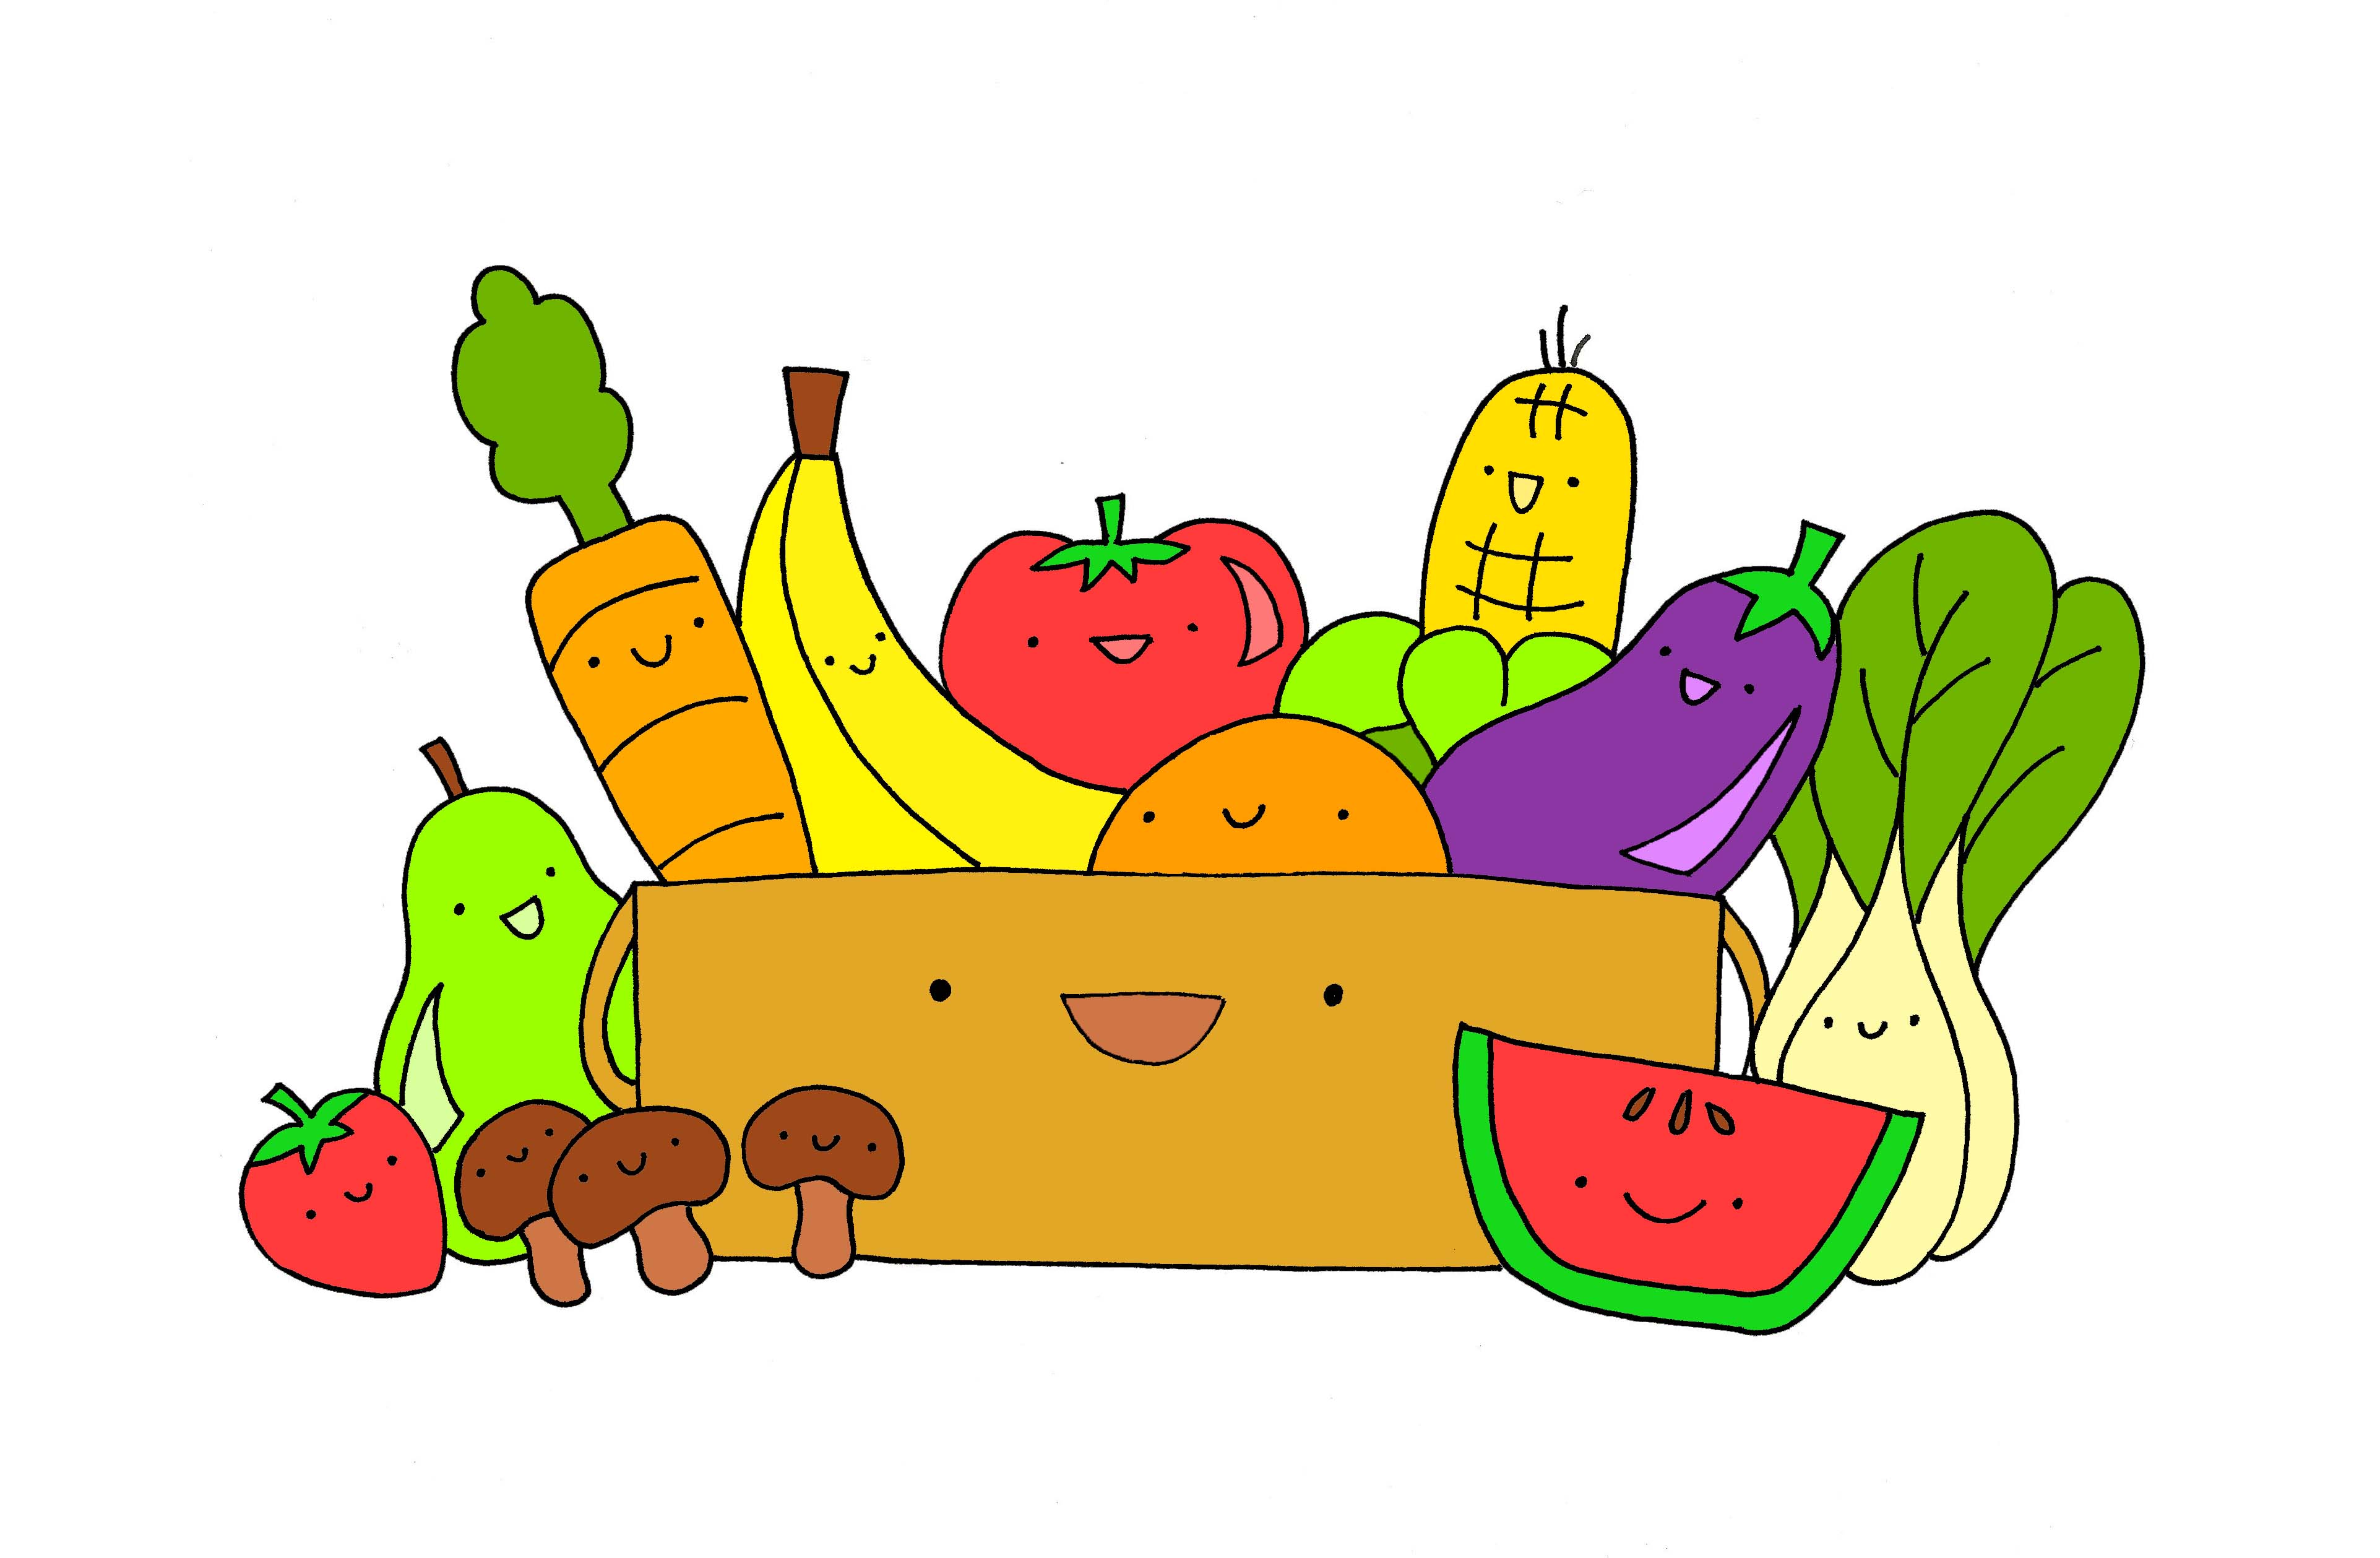 Healthy Food Border   Clipart Panda   Free Clipart Images